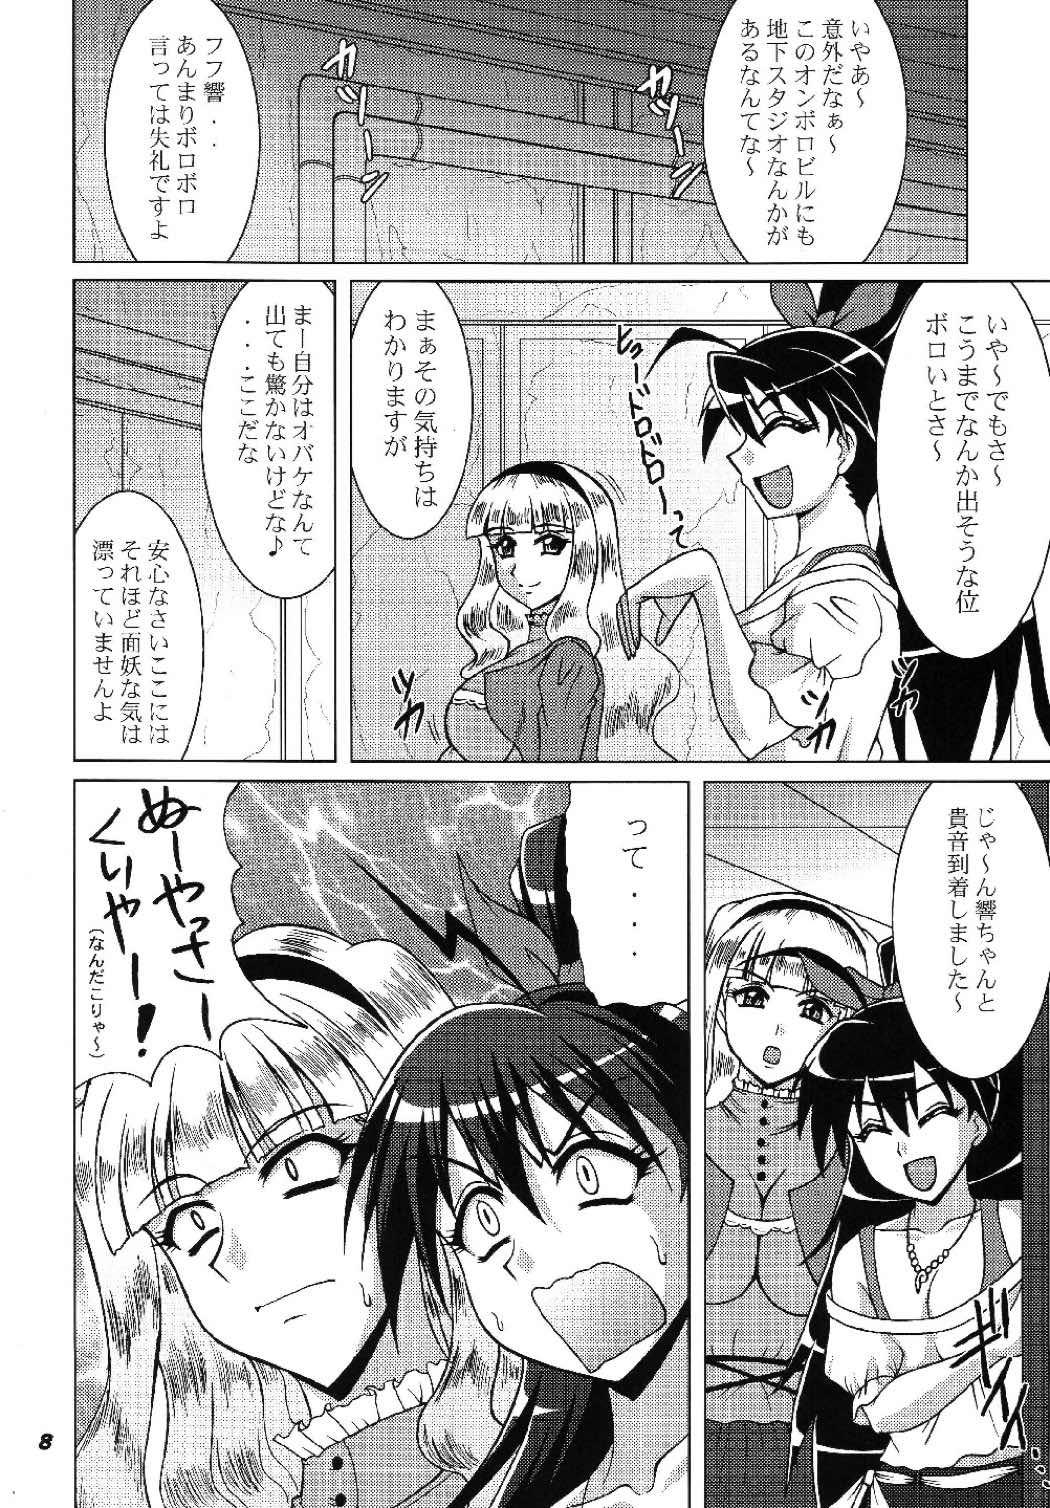 Spread TOUCH MY HE@RT 5 - The idolmaster Massages - Page 8